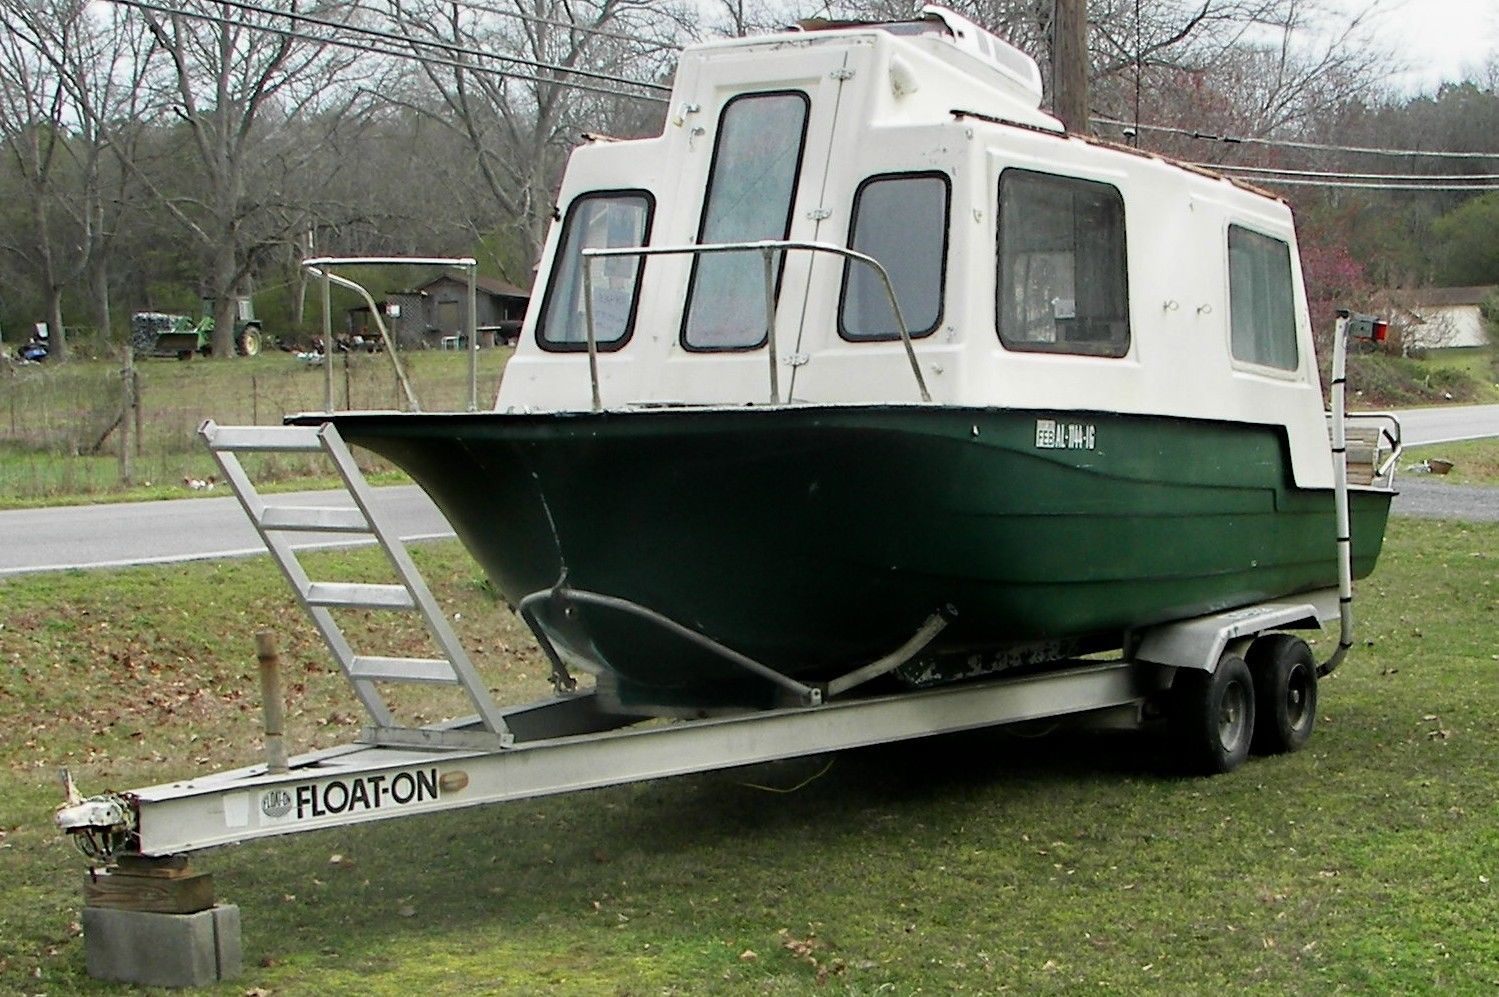 Hobo Houseboat 1970 for sale for $2,500 - Boats-from-USA.com.